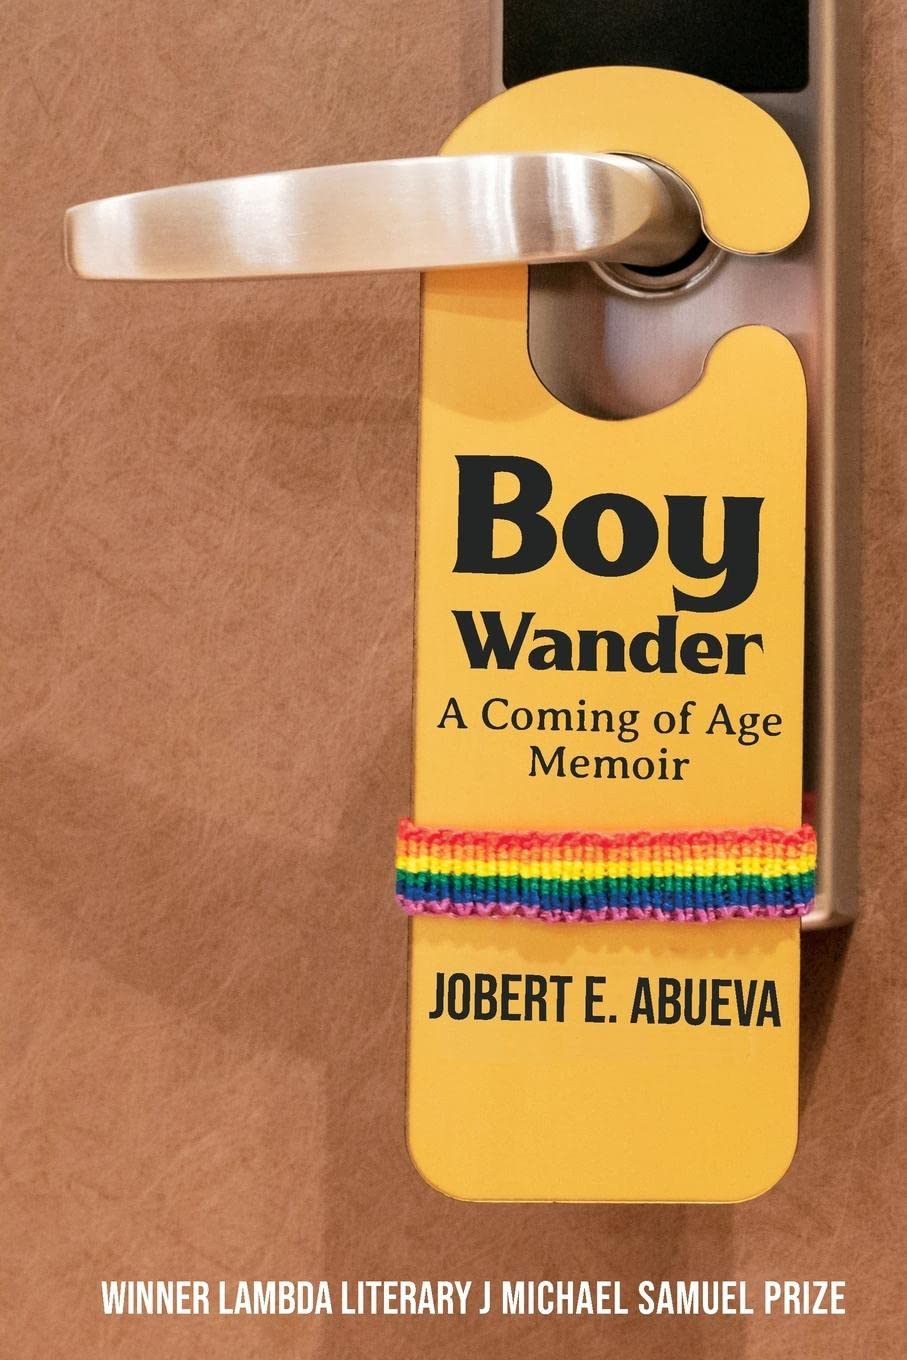 Cover of the nonfiction book "Boy Wander: A Coming of Age Memoir" by Jobert E. Abueva. The cover depicts a close-up image of a door handle with a sign hanging onto it. The sign includes the title, subtitle, and author name, and a rainbow sweatband is stretched around it.